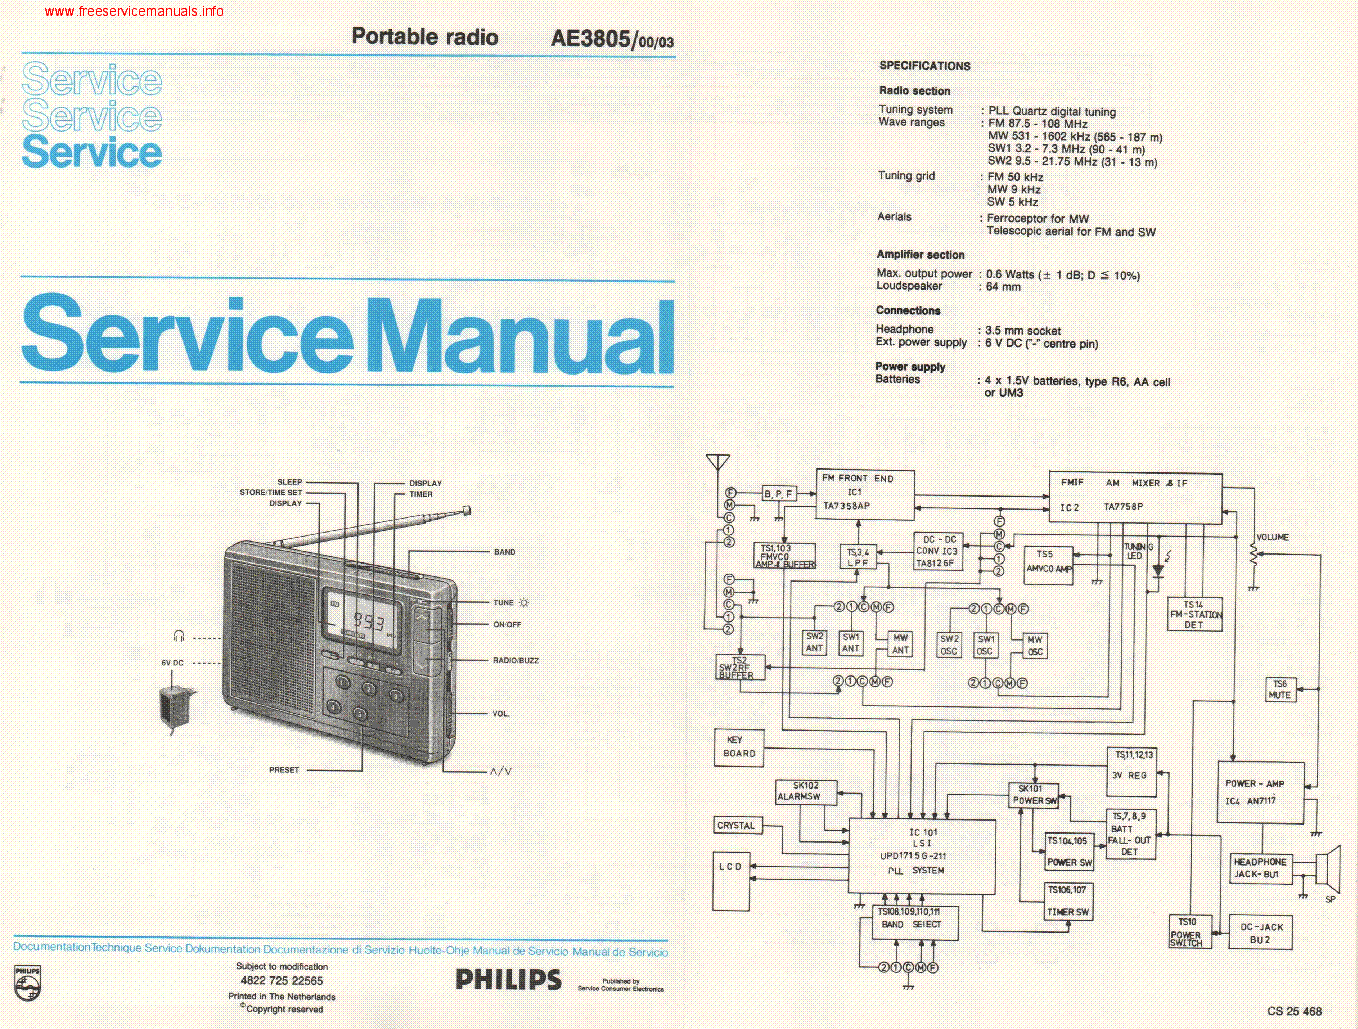 PHILIPS AE3805 00 03 SM service manual (1st page)